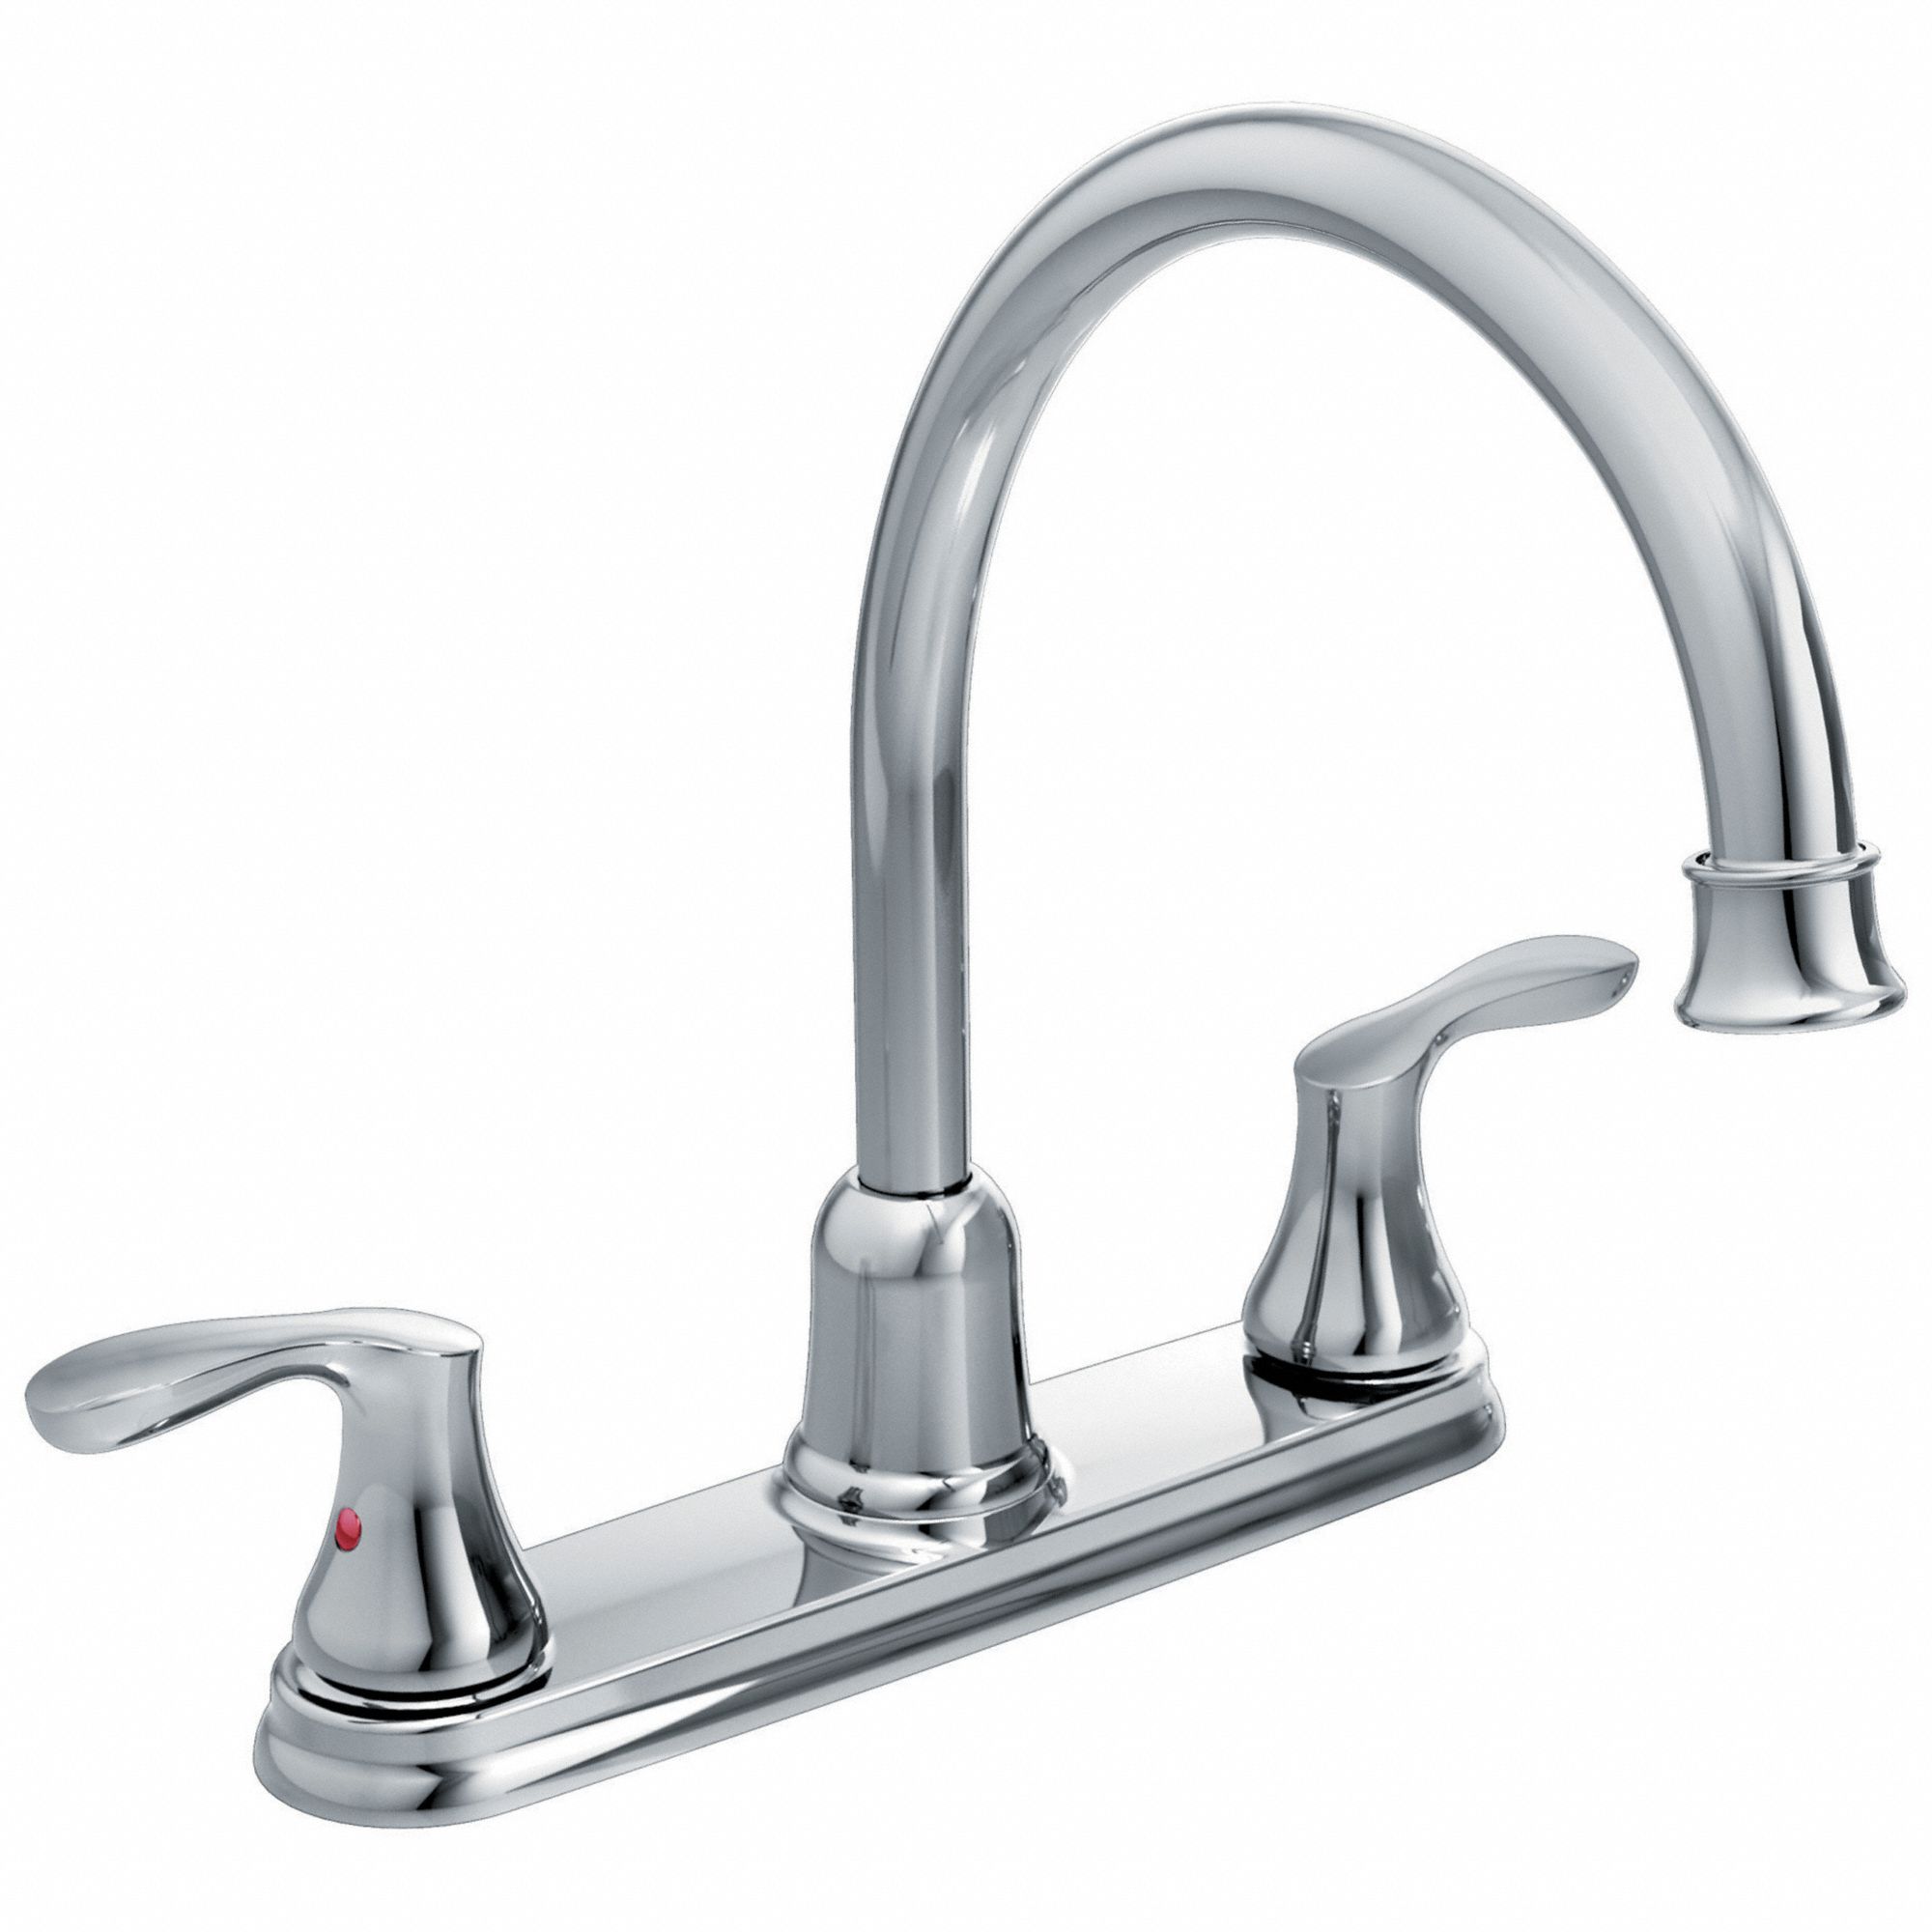 Kitchen Faucet: Cornerstone®, 40617, Chrome Finish, 1.5 gpm Flow Rate, Drrain Not Included Drain